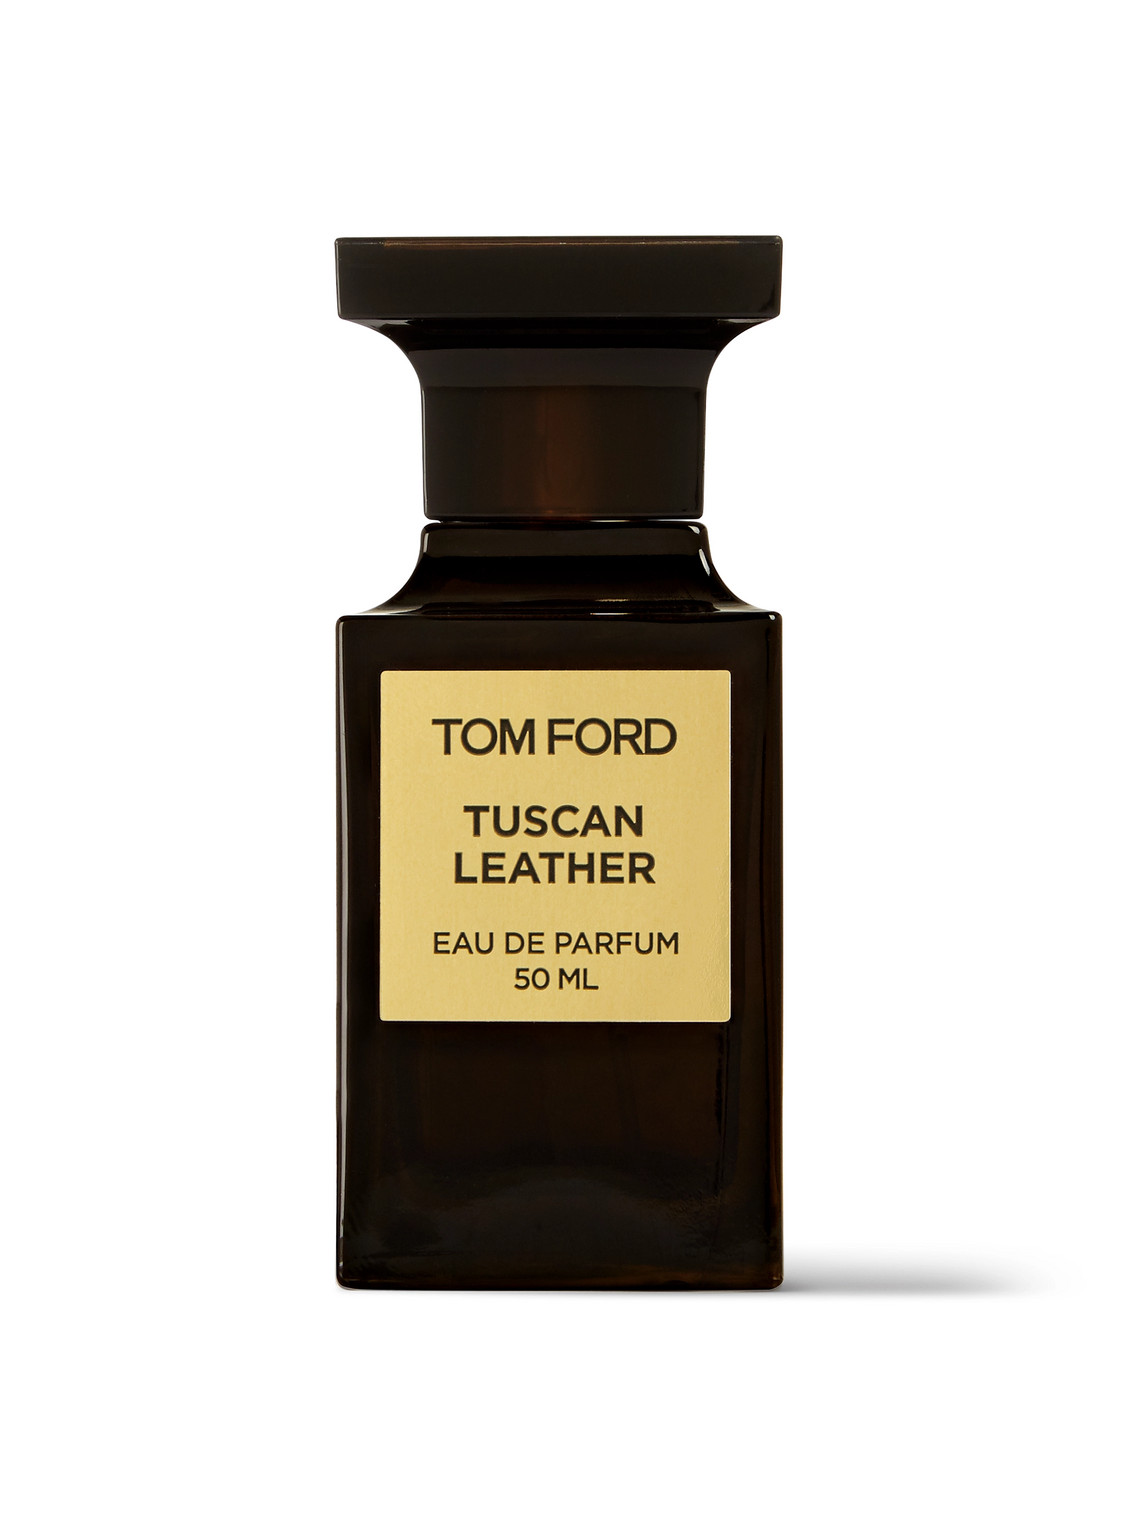 Tom Ford Private Blend Tuscan Leather Eau De Parfum, 50ml In White